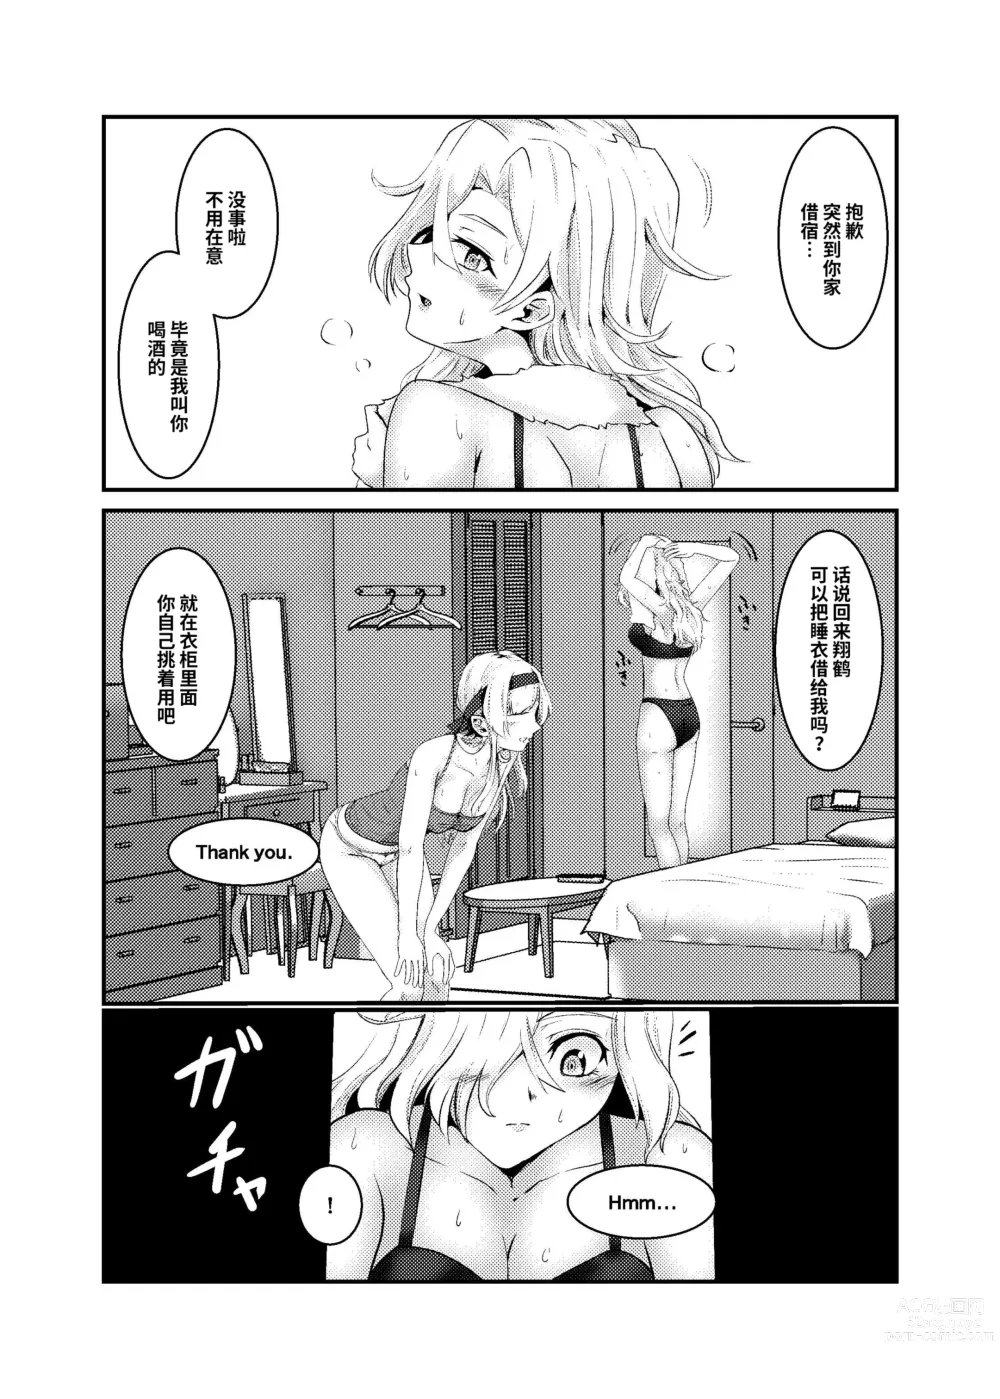 Page 5 of doujinshi Covered by Honey...